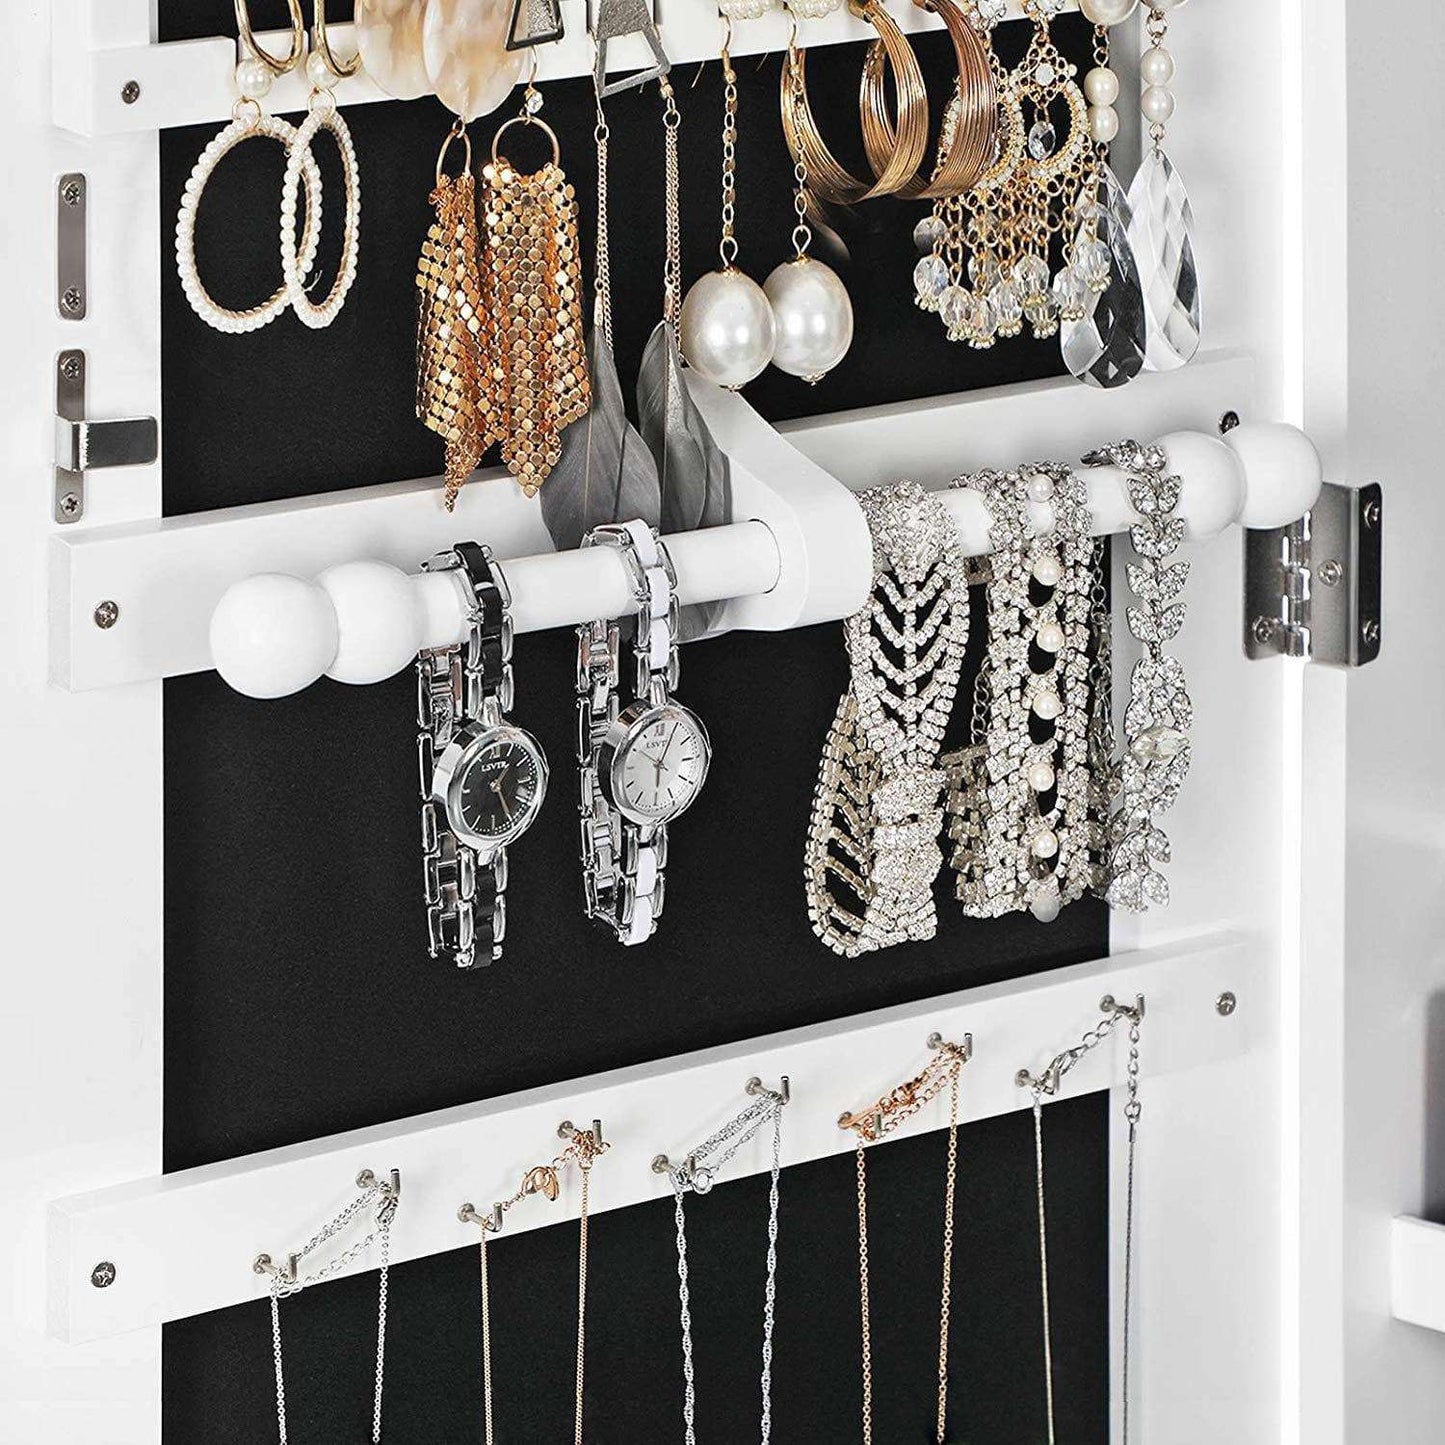 Nancy's jewelry cabinet with mirror - Full-length mirror hanging LED lighting - 36.8 x 10 x 120 cm